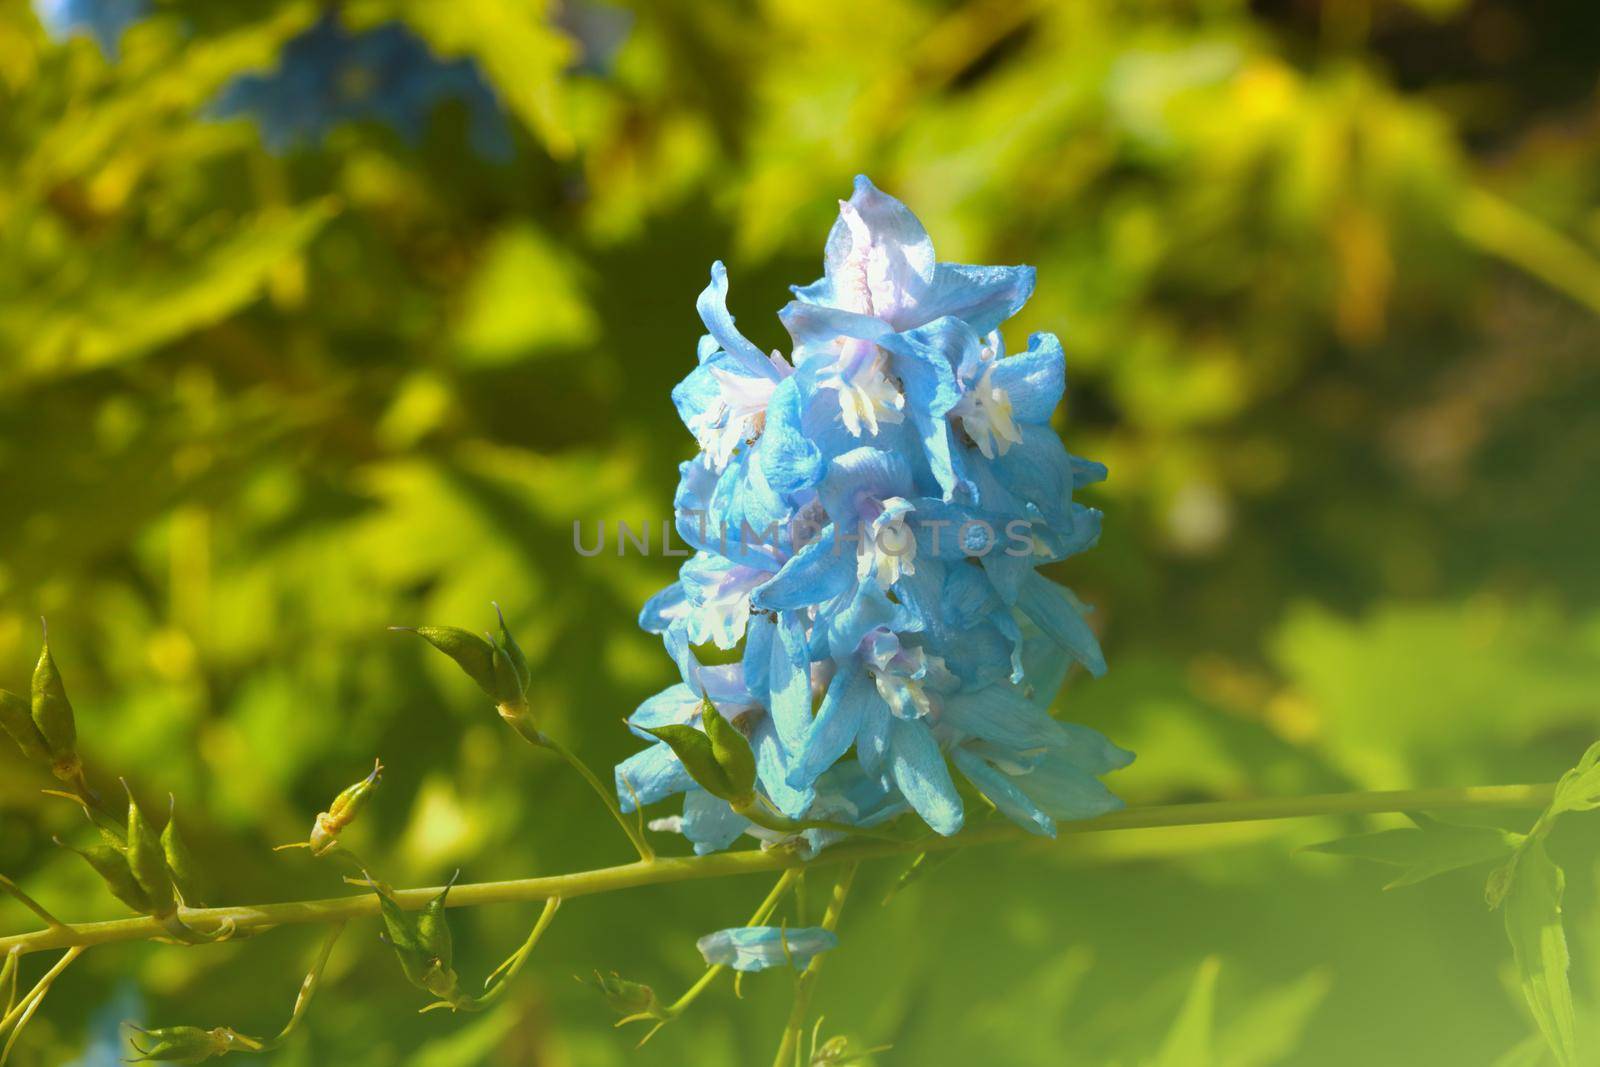 The blue flower blooms in the spring in the park. by kip02kas